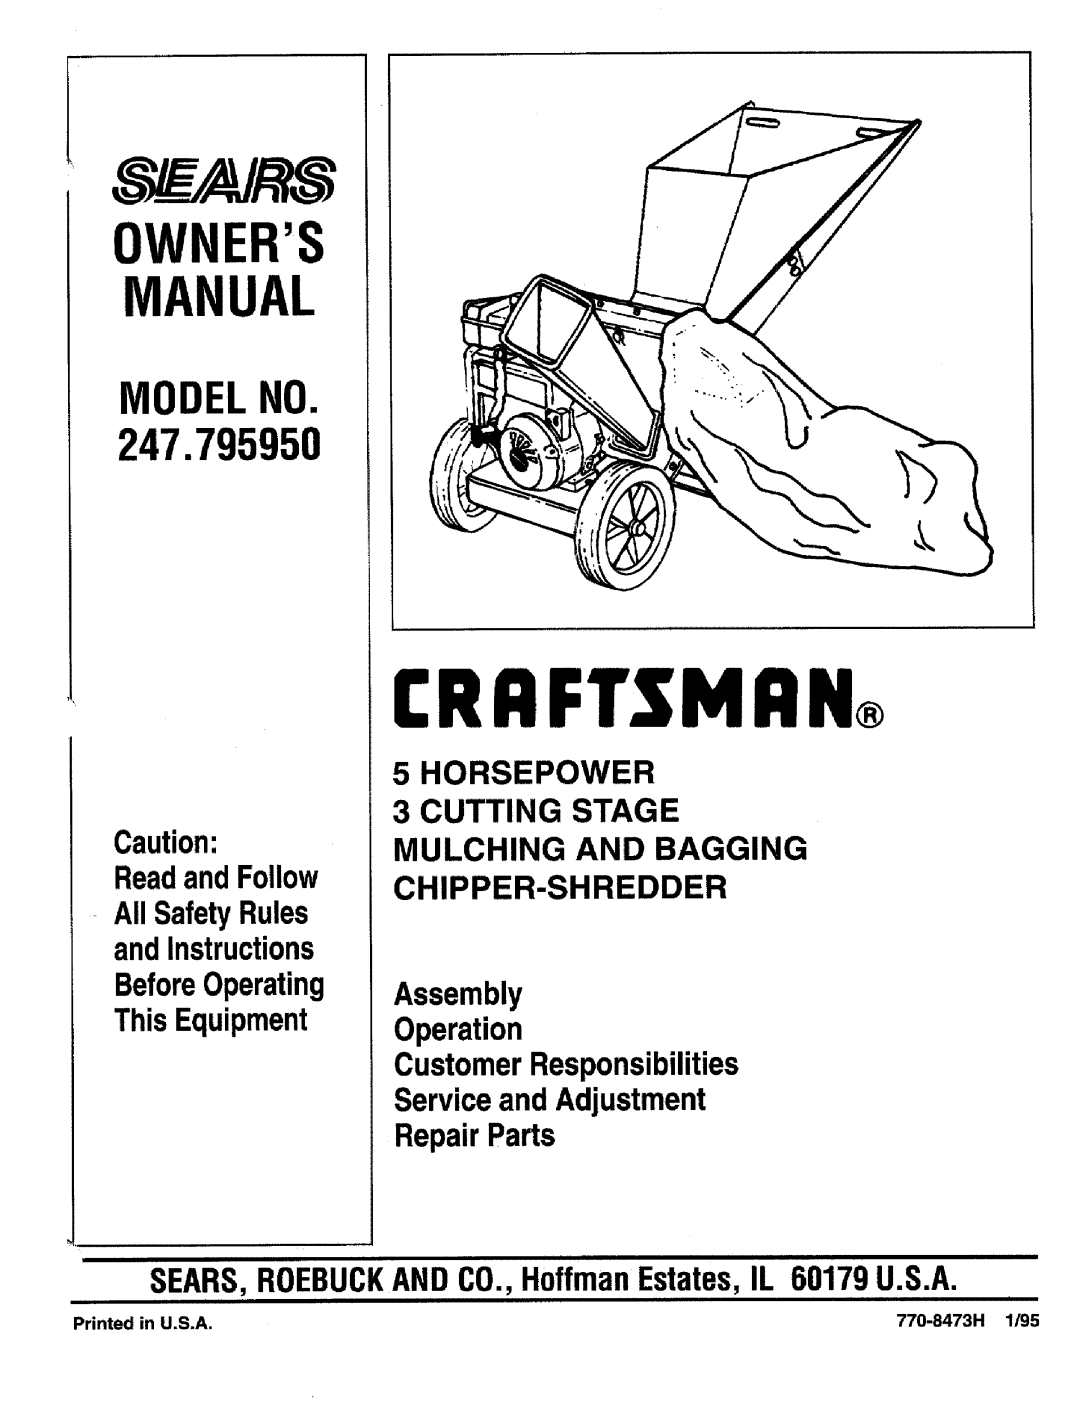 Craftsman 247.795950 manual Owners, Manual, Modelno, Caution ReadandFollow, AllSafetyRules andInstructions, Horsepower 